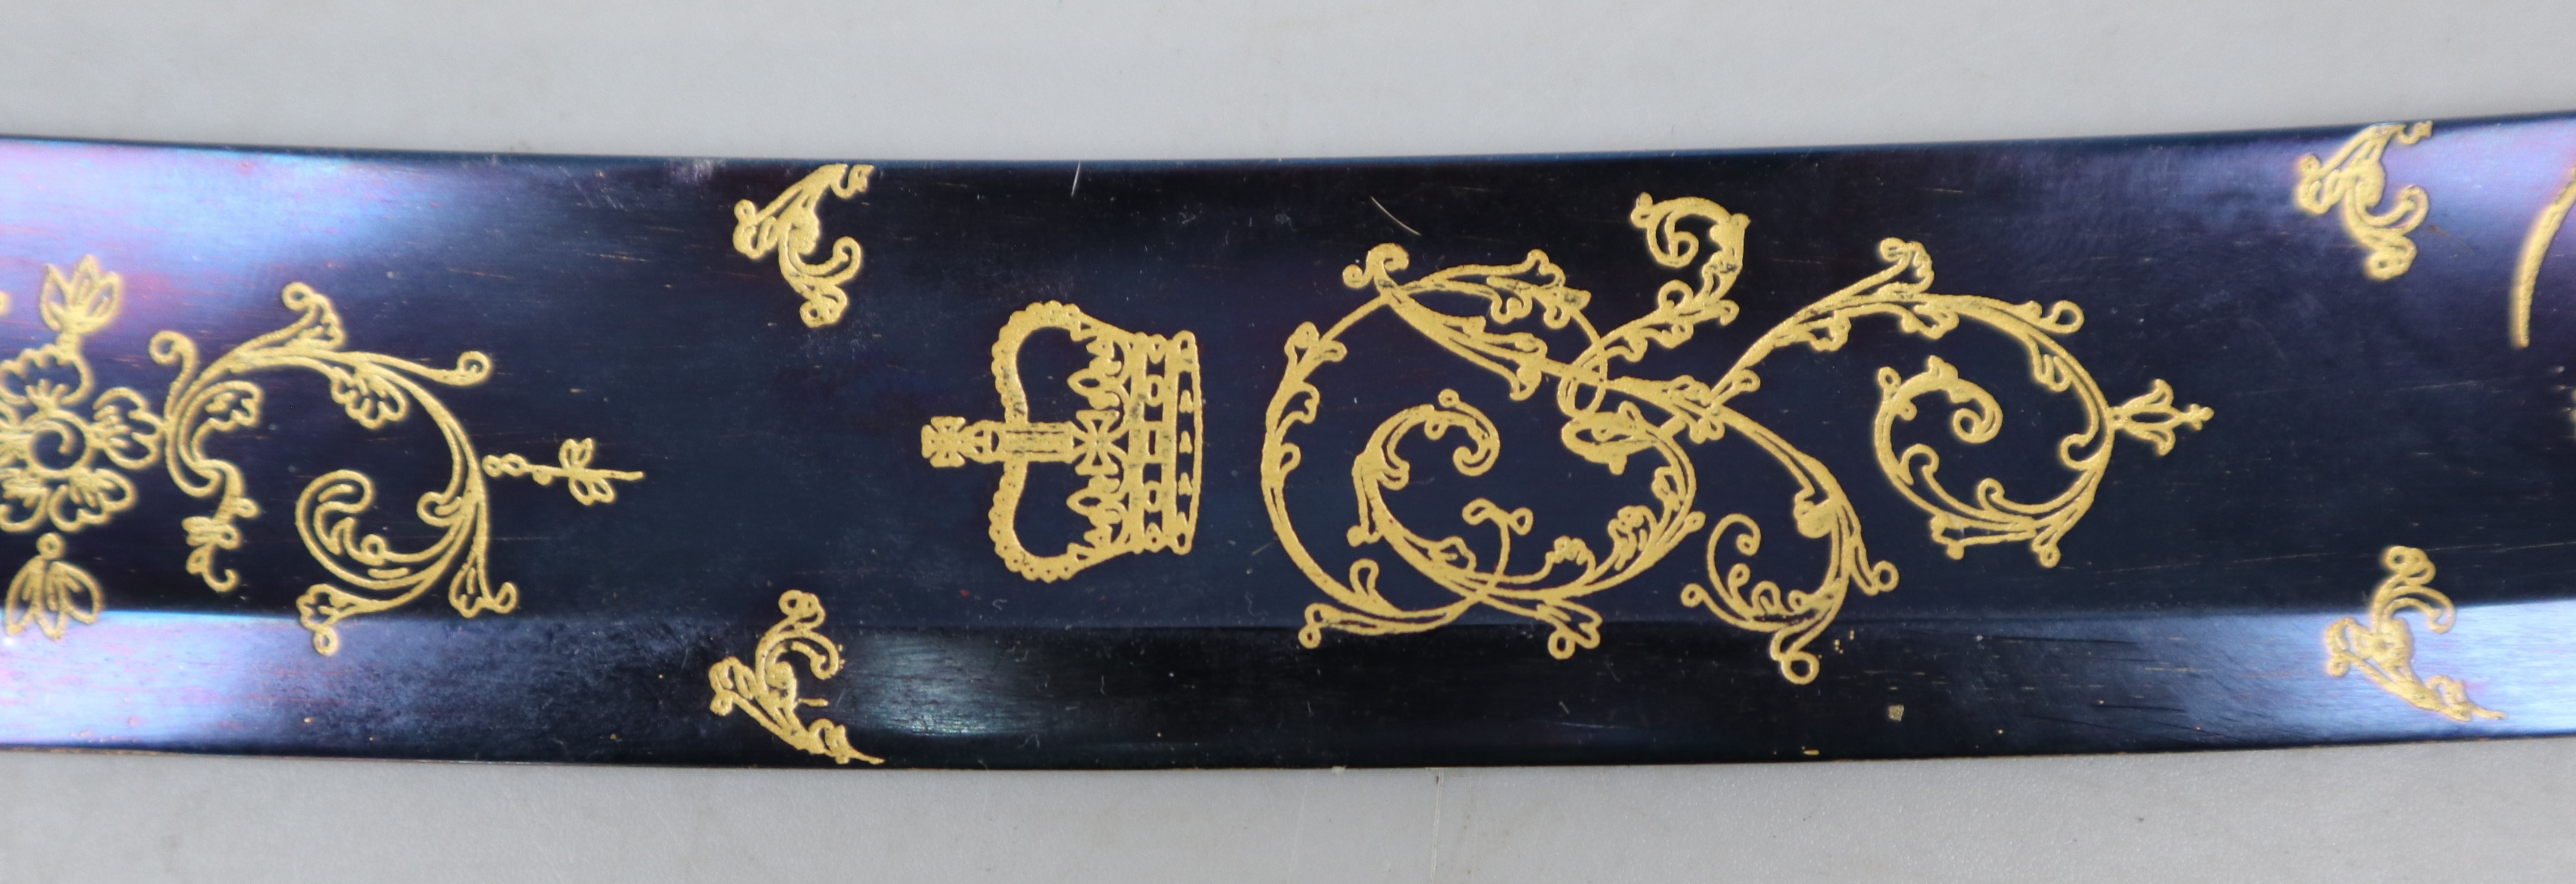 Craig & Co curved and decorated sword blade - Image 5 of 7